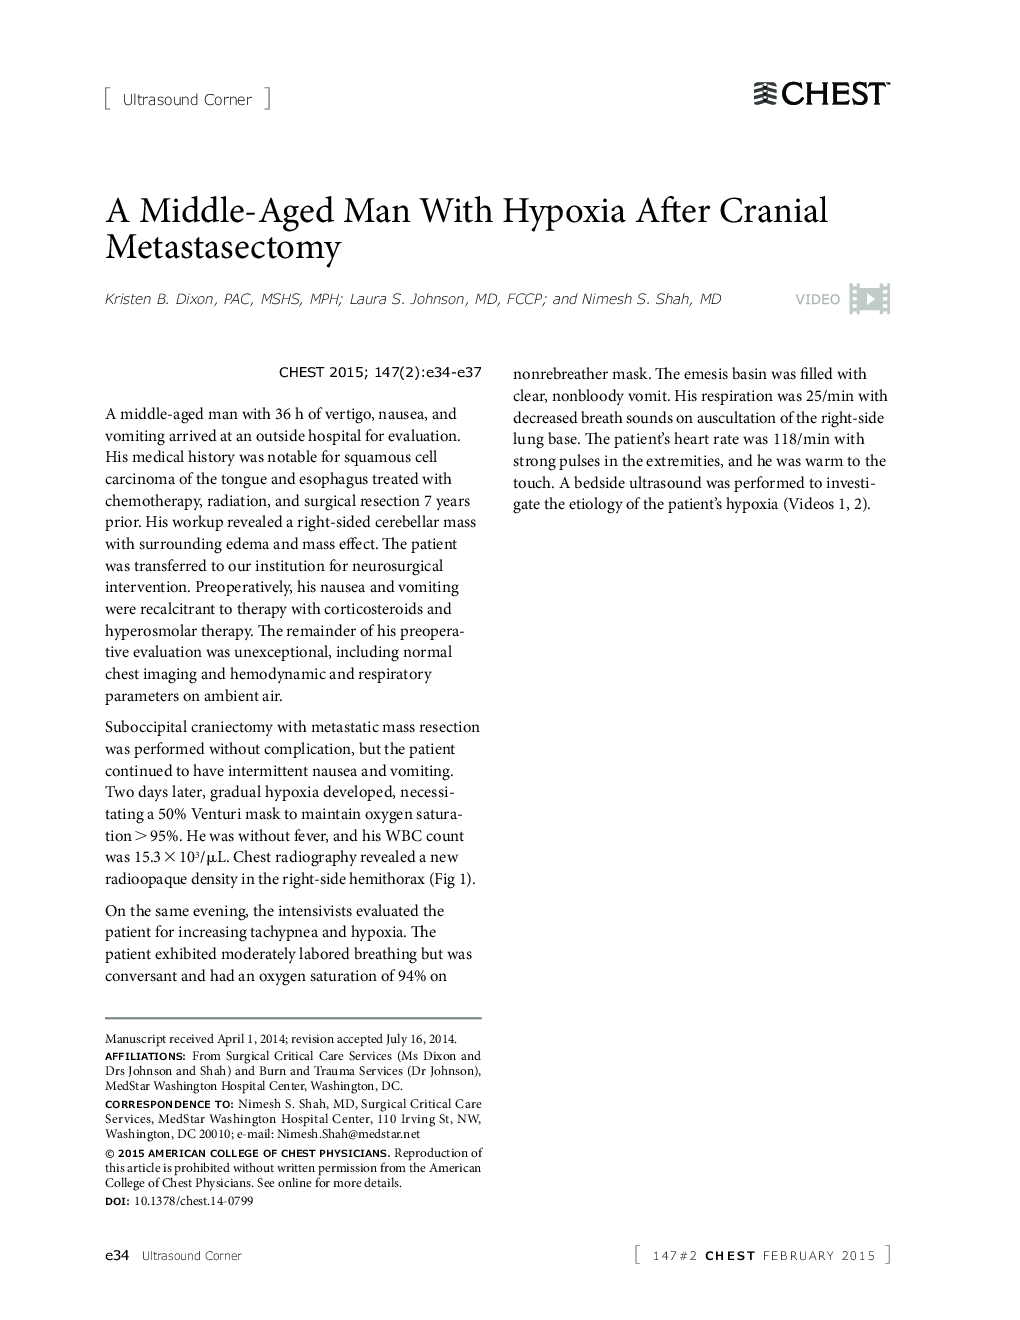 A Middle-Aged Man With Hypoxia After Cranial Metastasectomy